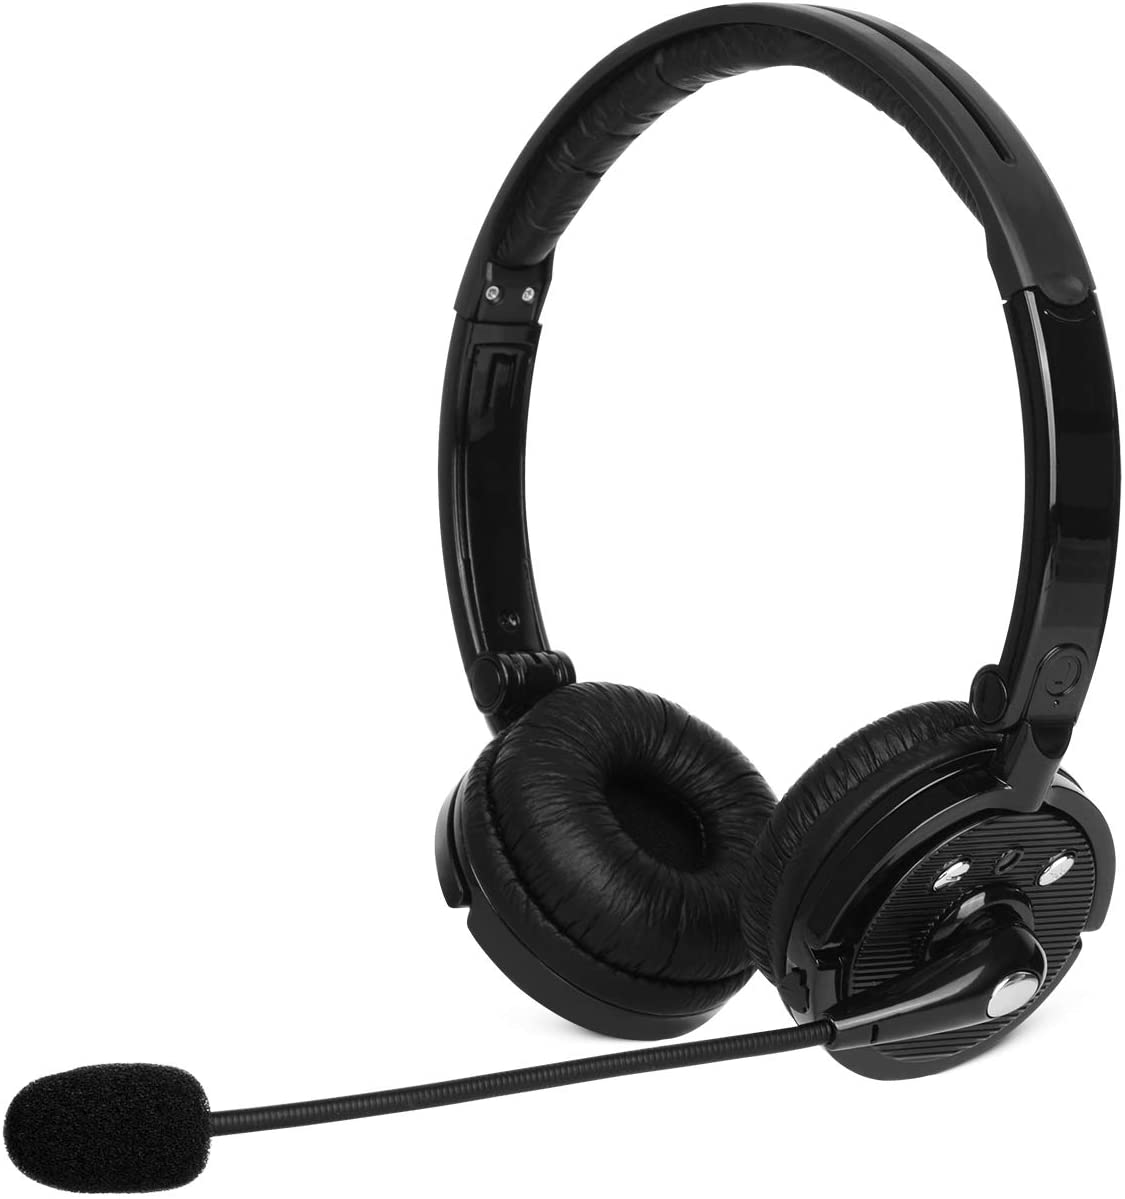 Bluetooth Headphones for Cell Phones, Wireless Office On Ear Headset with Noise Cancelling Microphone - BLACK.